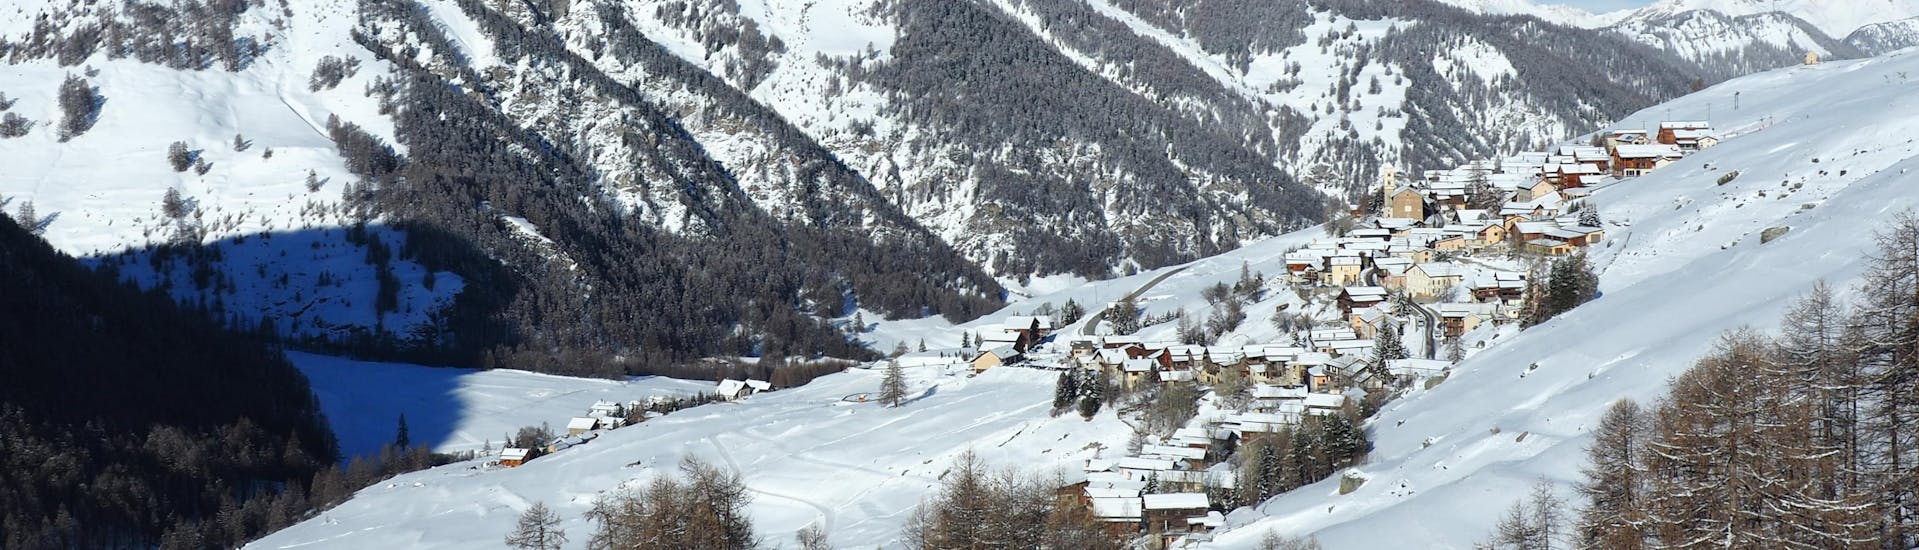 The charming village of Queyras during the winter where ski schools provide skiing lessons.